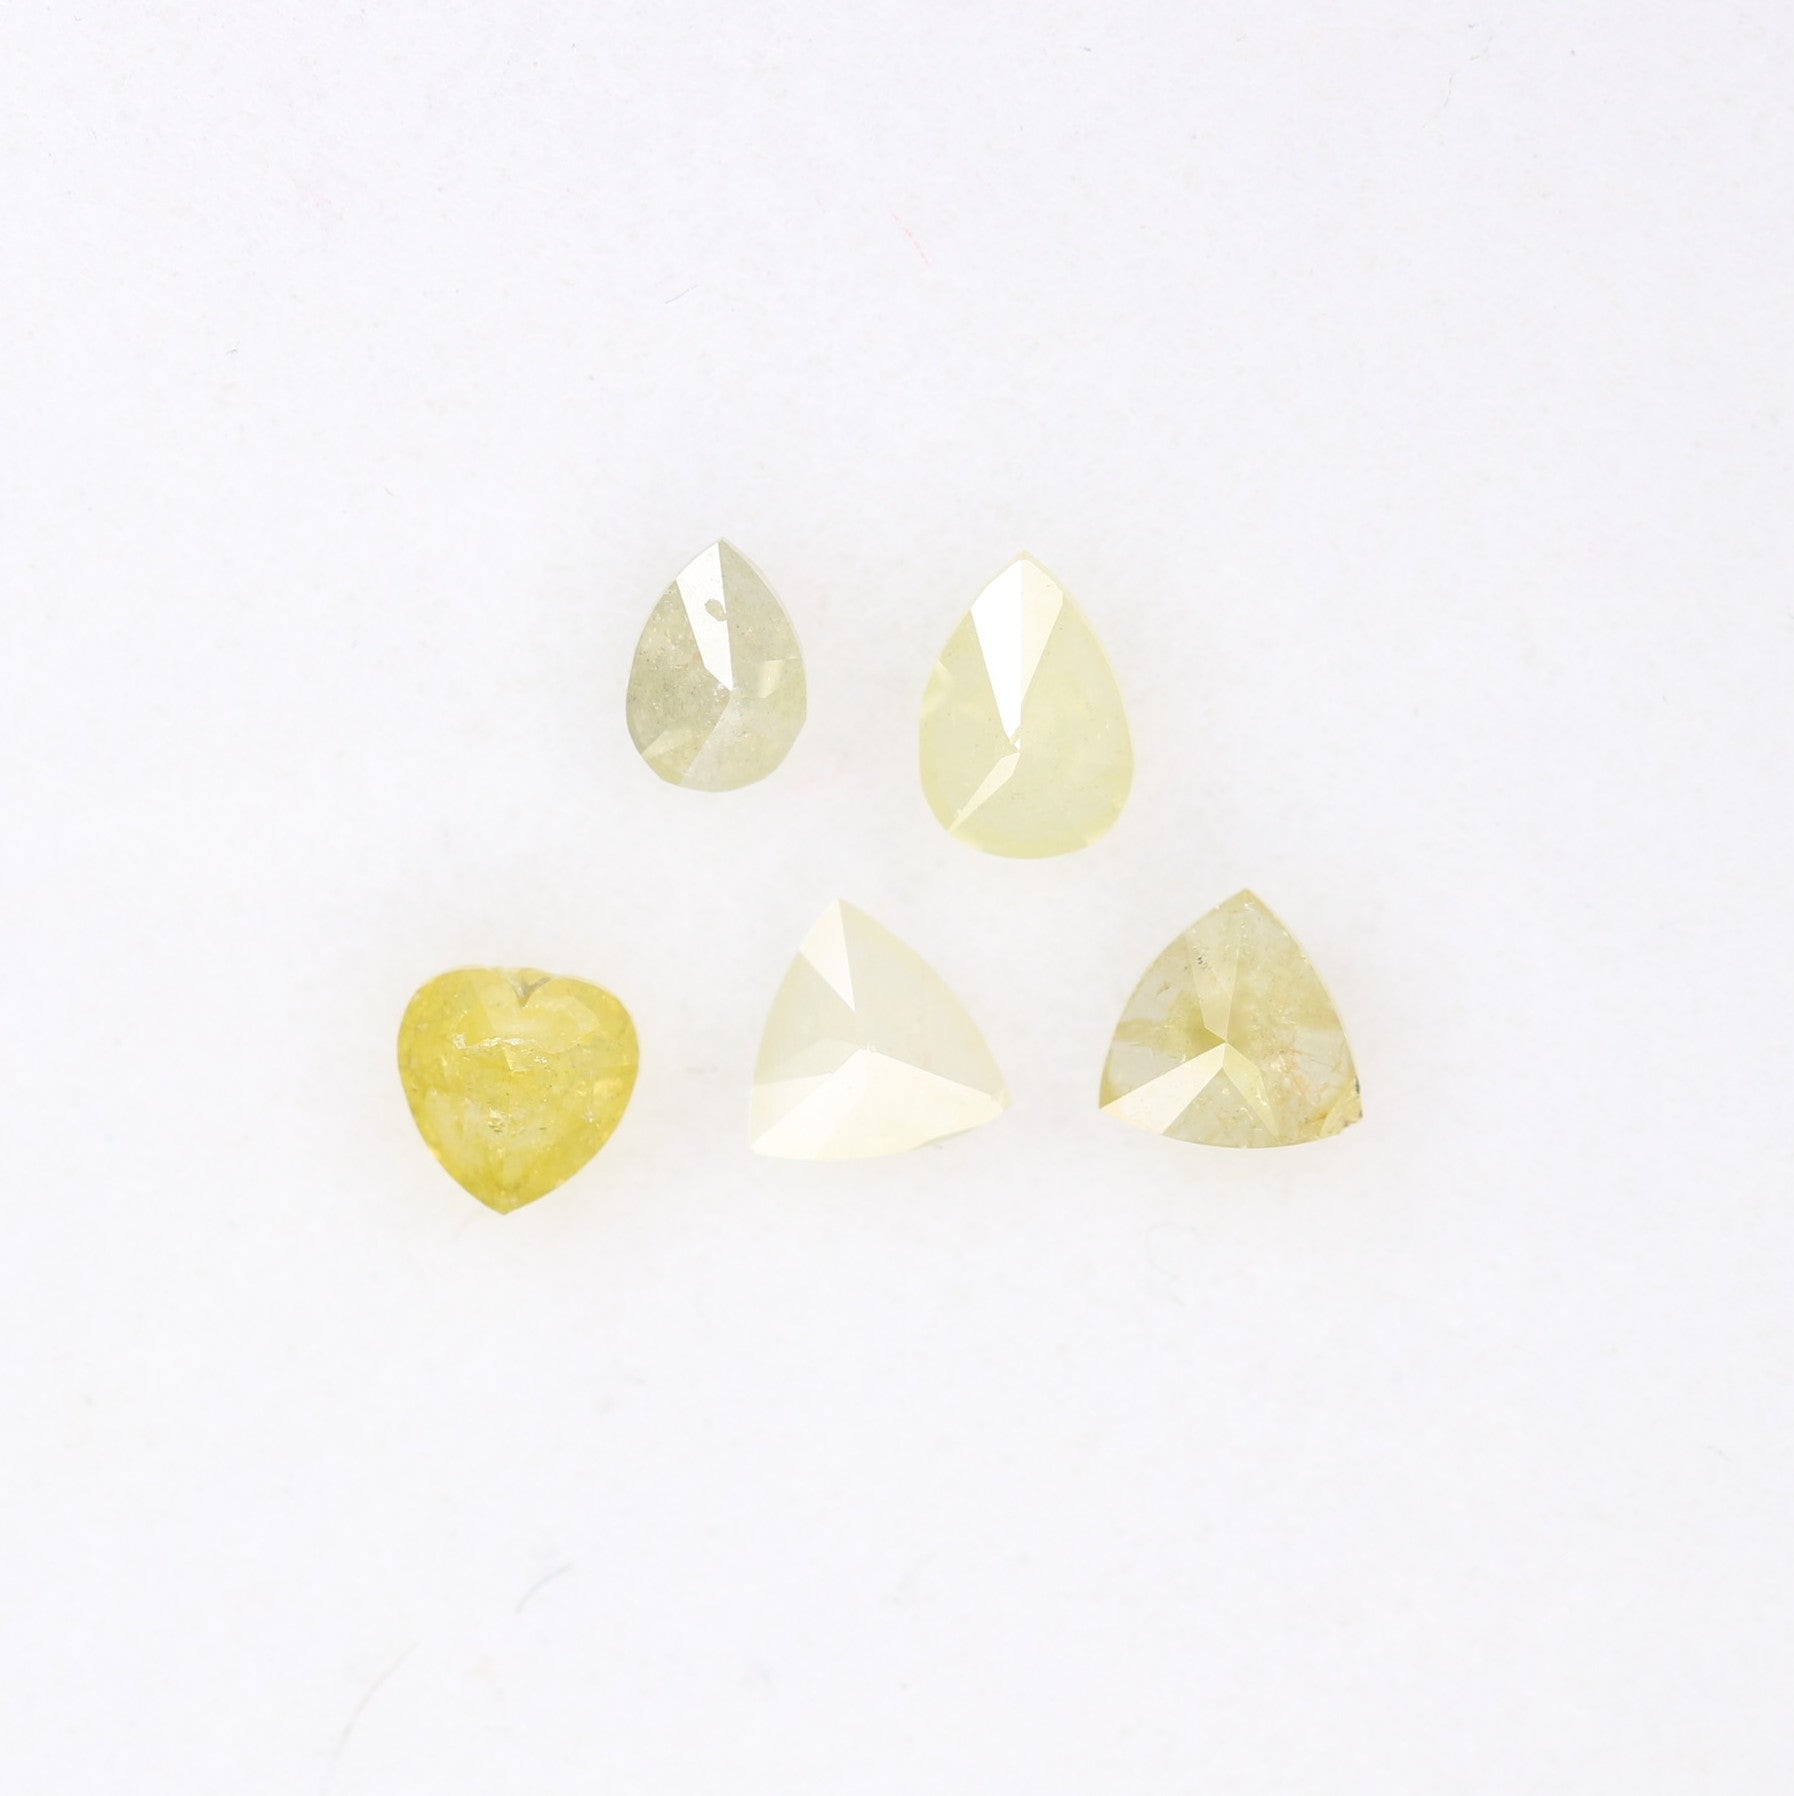 0.56 CT Mix Shape Fancy Colored 3.10 To 3.90 MM Diamond For Designer Jewelry